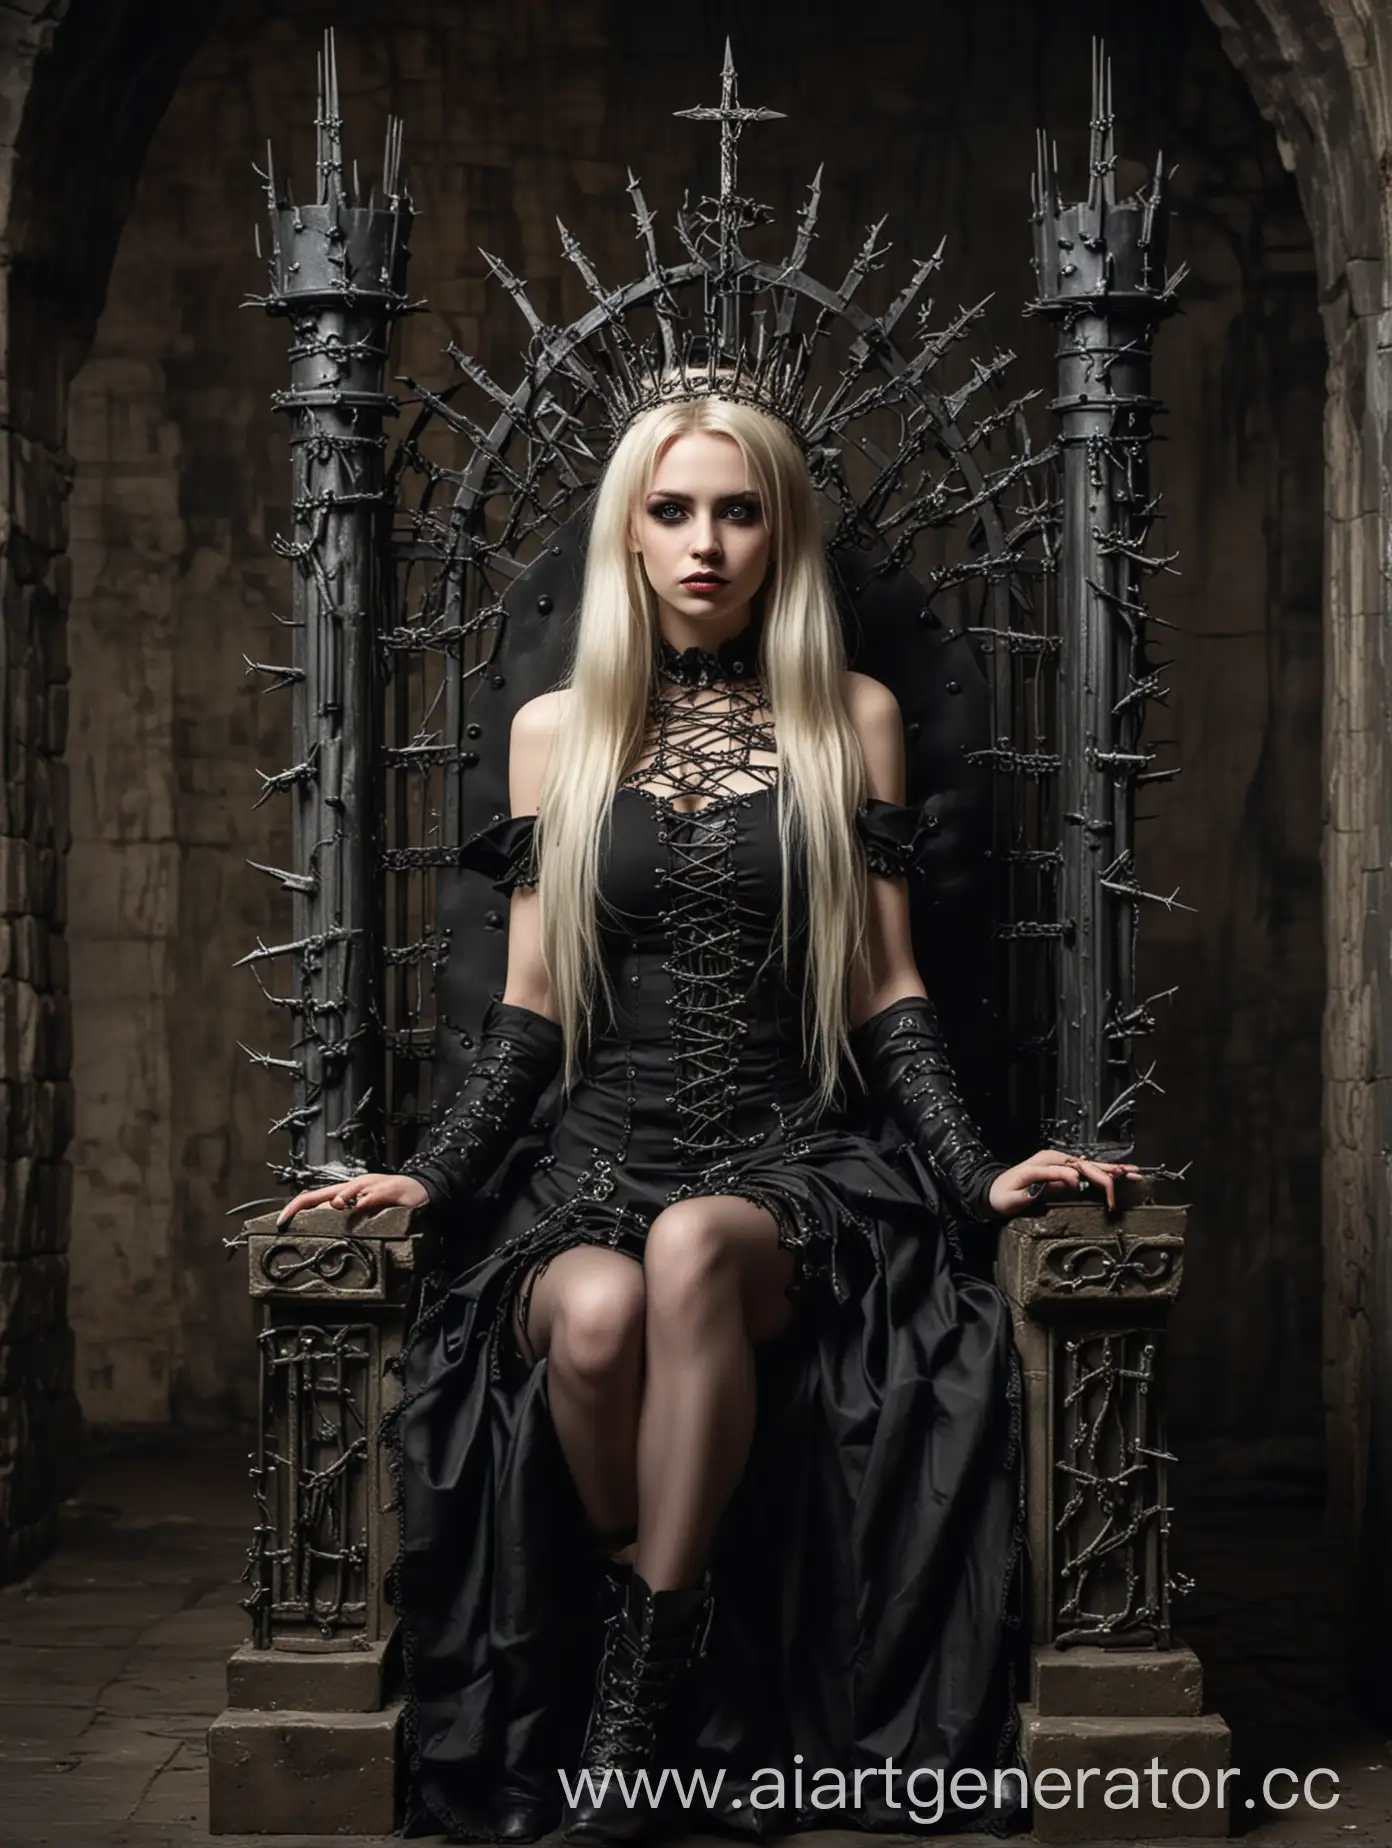 Enthroned-Gothic-Beauty-with-Thorn-Diadem-in-Dungeon-Ambiance